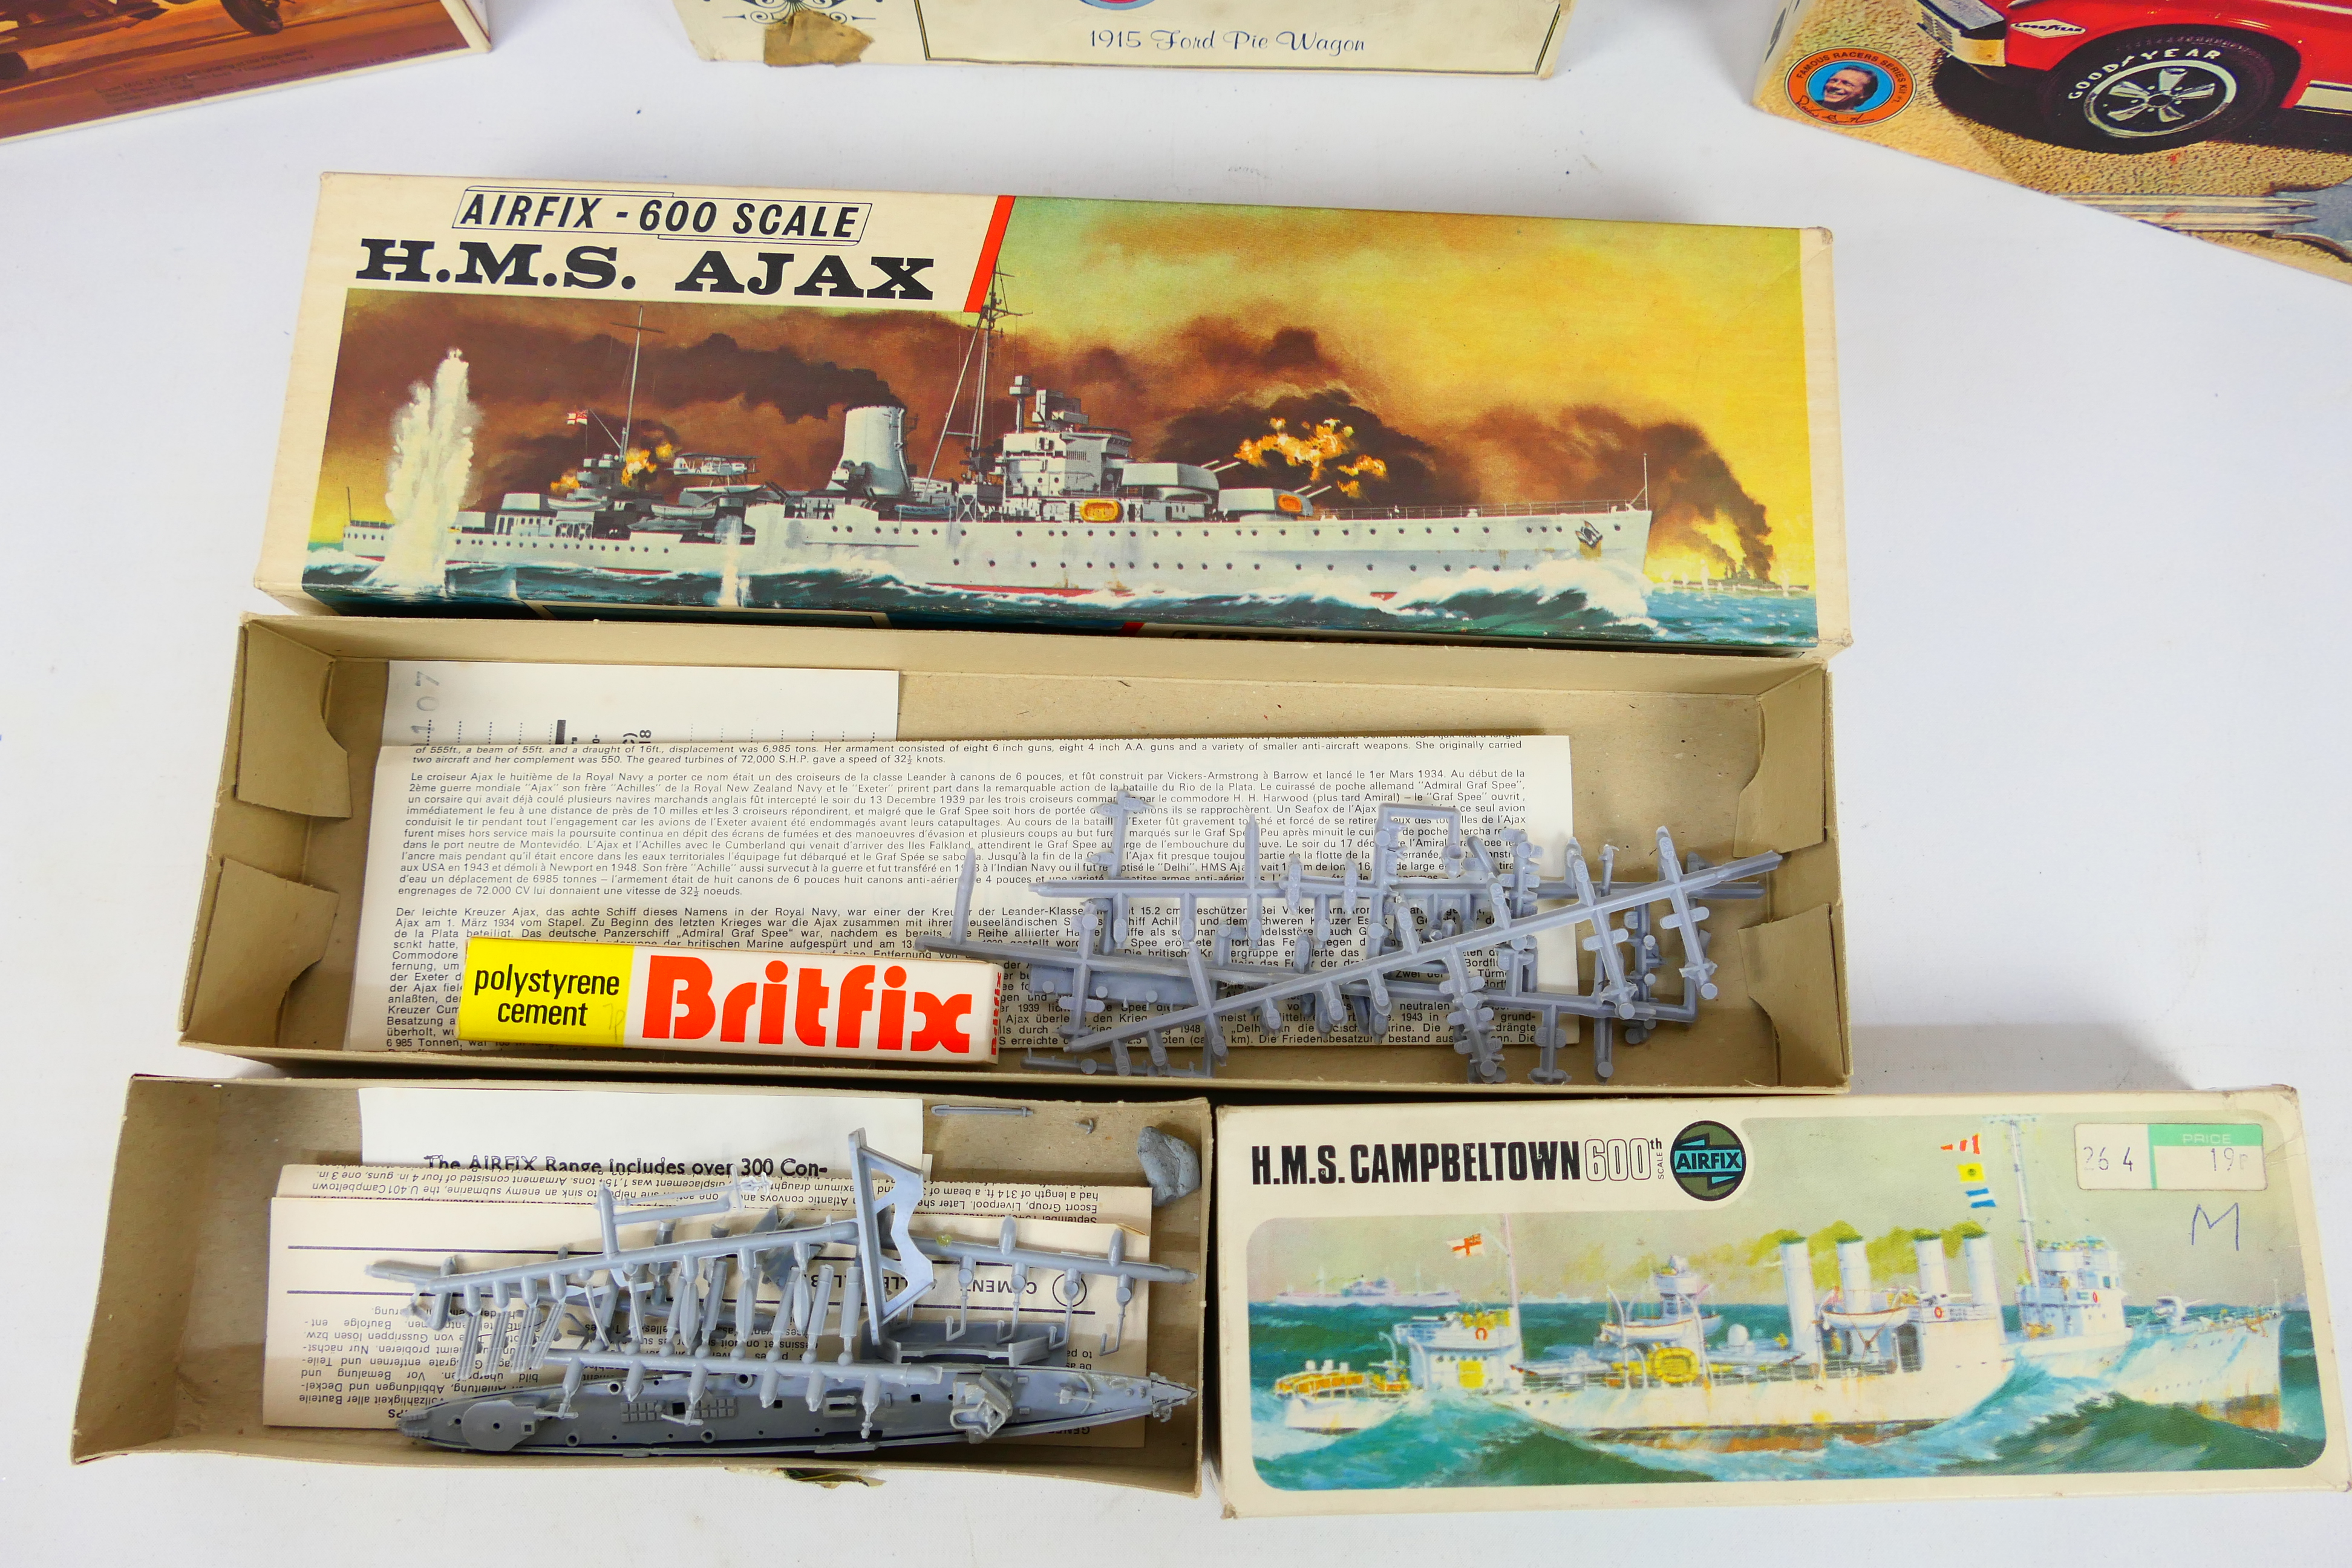 Revell - Pyro - Matchbox - Airfix - A group of part made vintage model kits, - Image 4 of 8